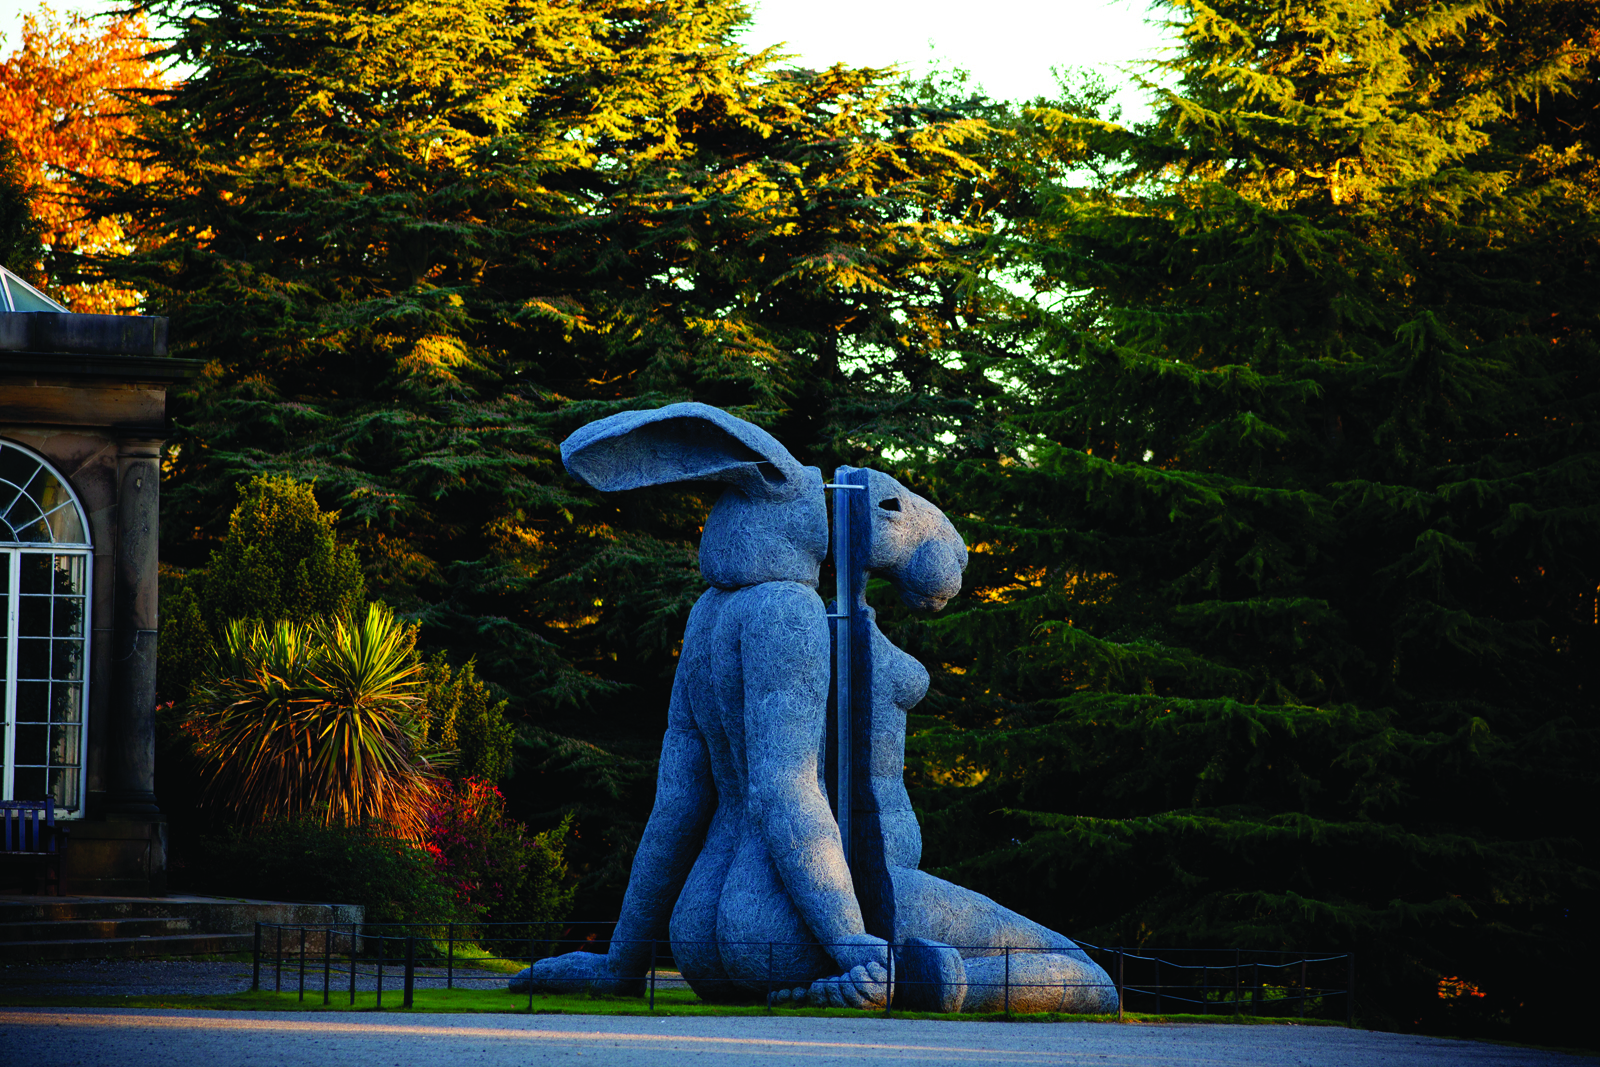 A sculpture with a woman's body and a rabbit head